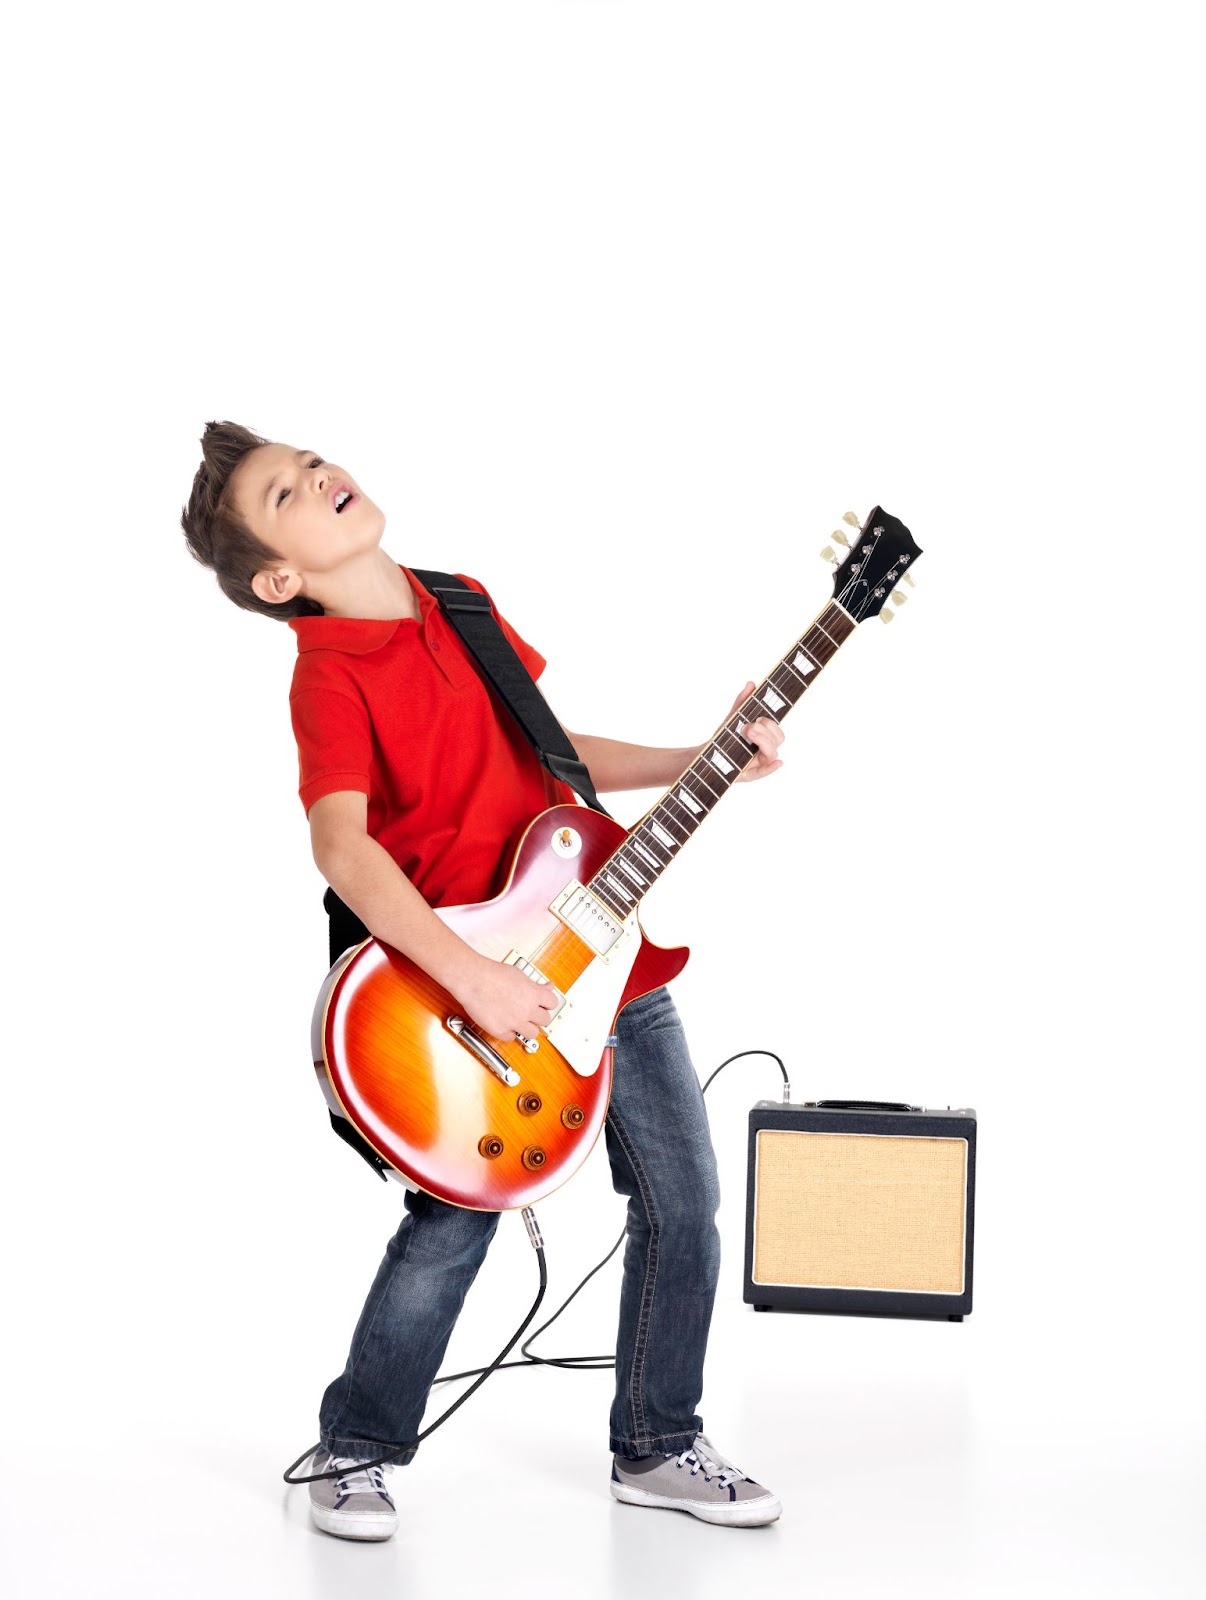 A picture of a young boy playing an electric guitar and rocking out